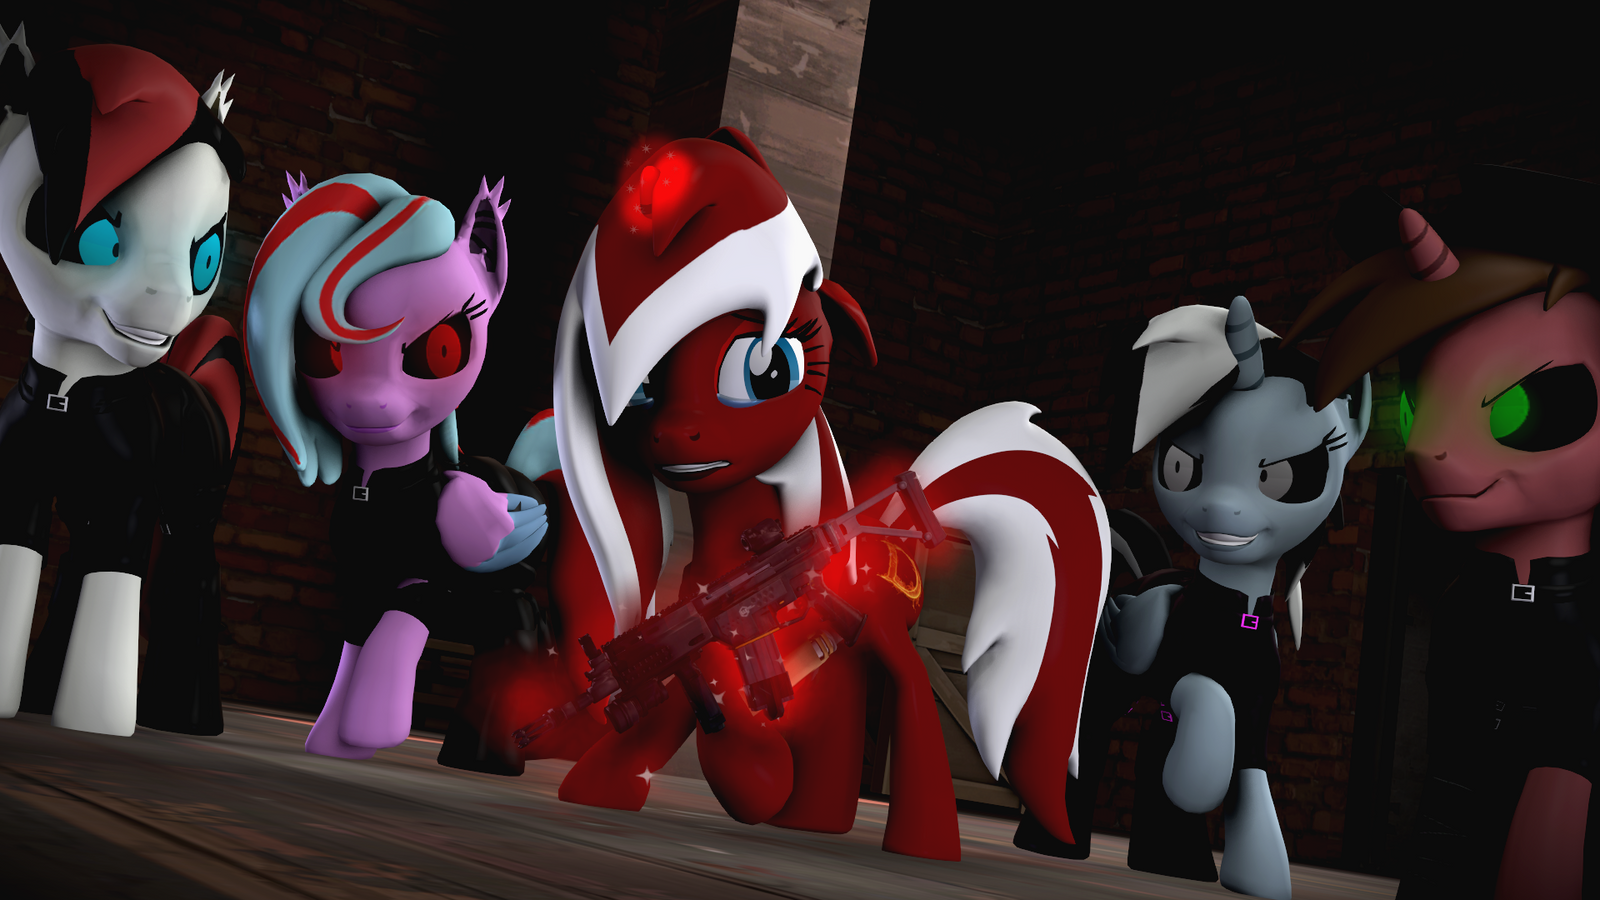 SFM Surrounded by Nightmares by FD-Daylight on DeviantArt.